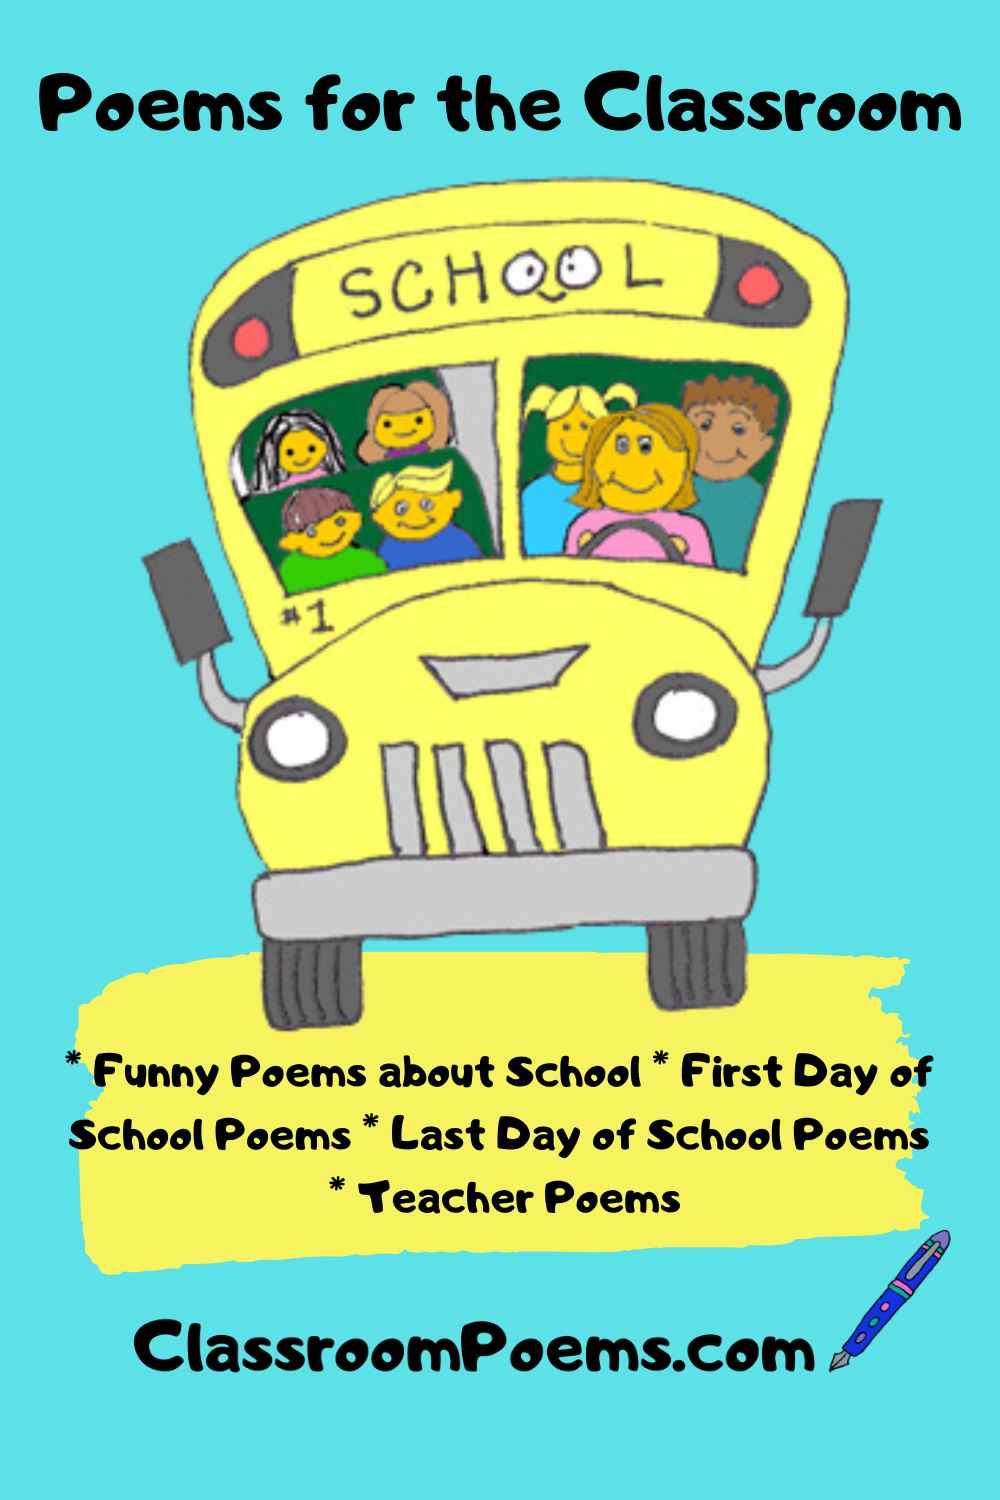 Funny poems about school by Denise Rodgers on ClassroomPoems.com.